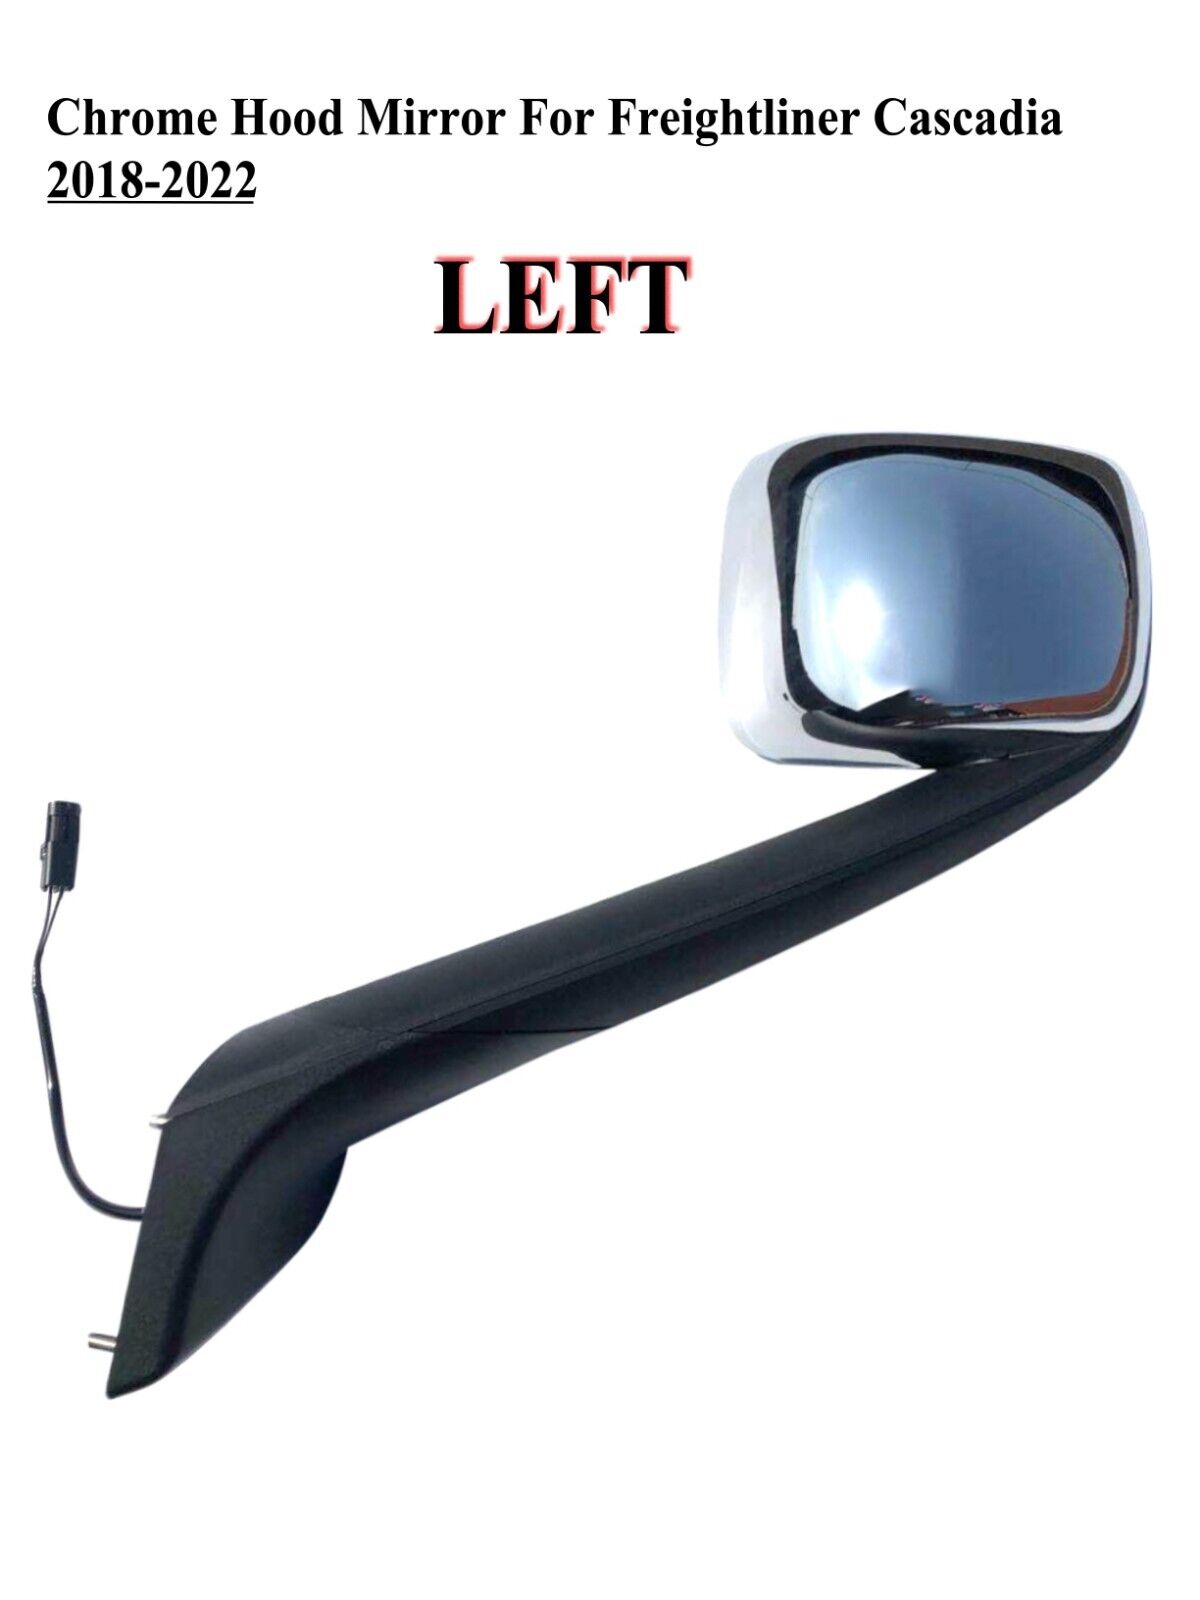 Driver Left Side Chrome Hood Mirror with Heated for Freightliner Cascadia 18 up